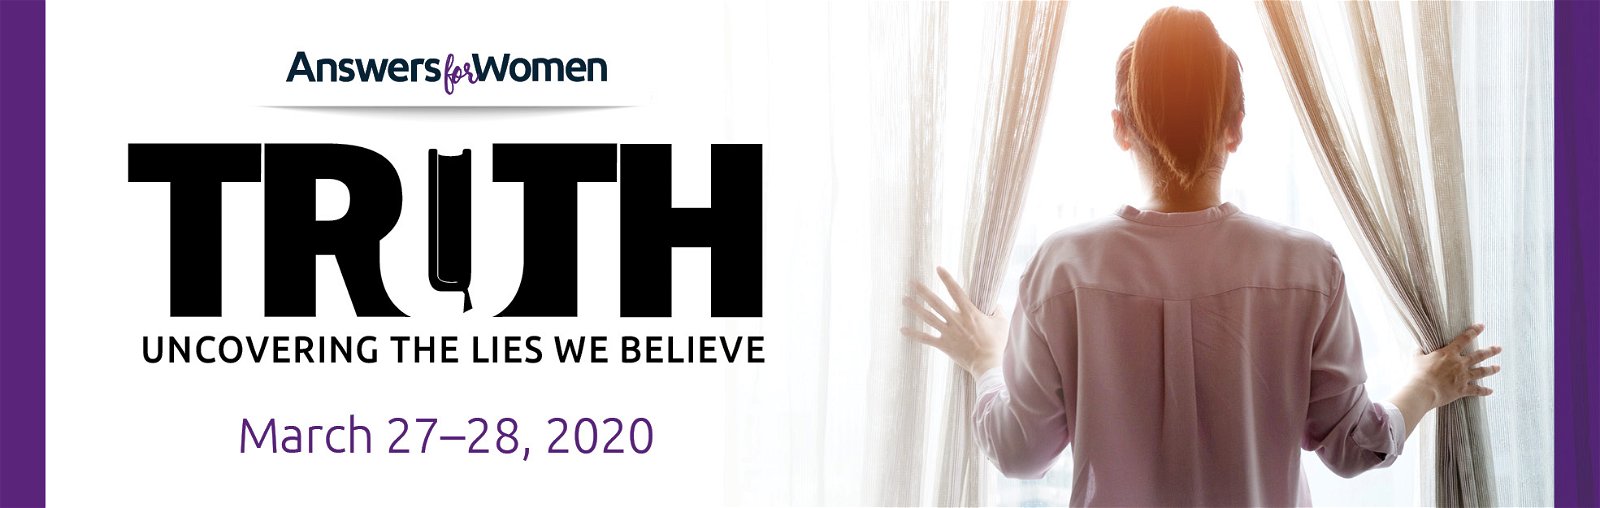 Answers for Women Conference 2020